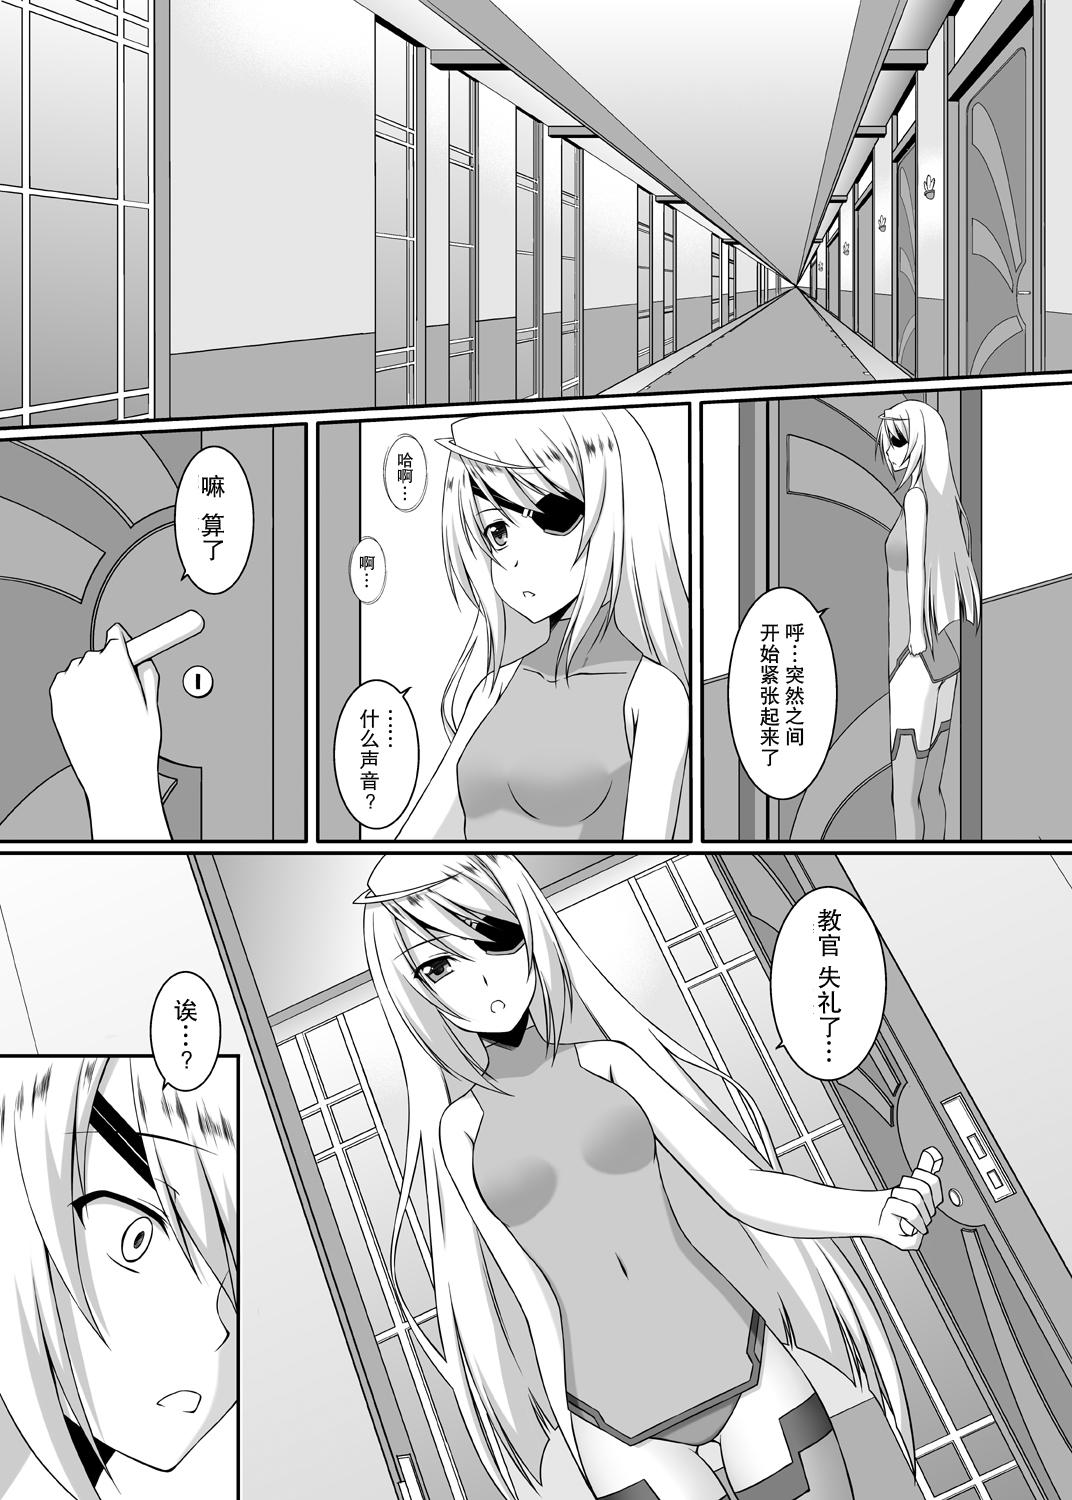 Cam Sex Snow Thaw - Infinite stratos Behind - Page 8